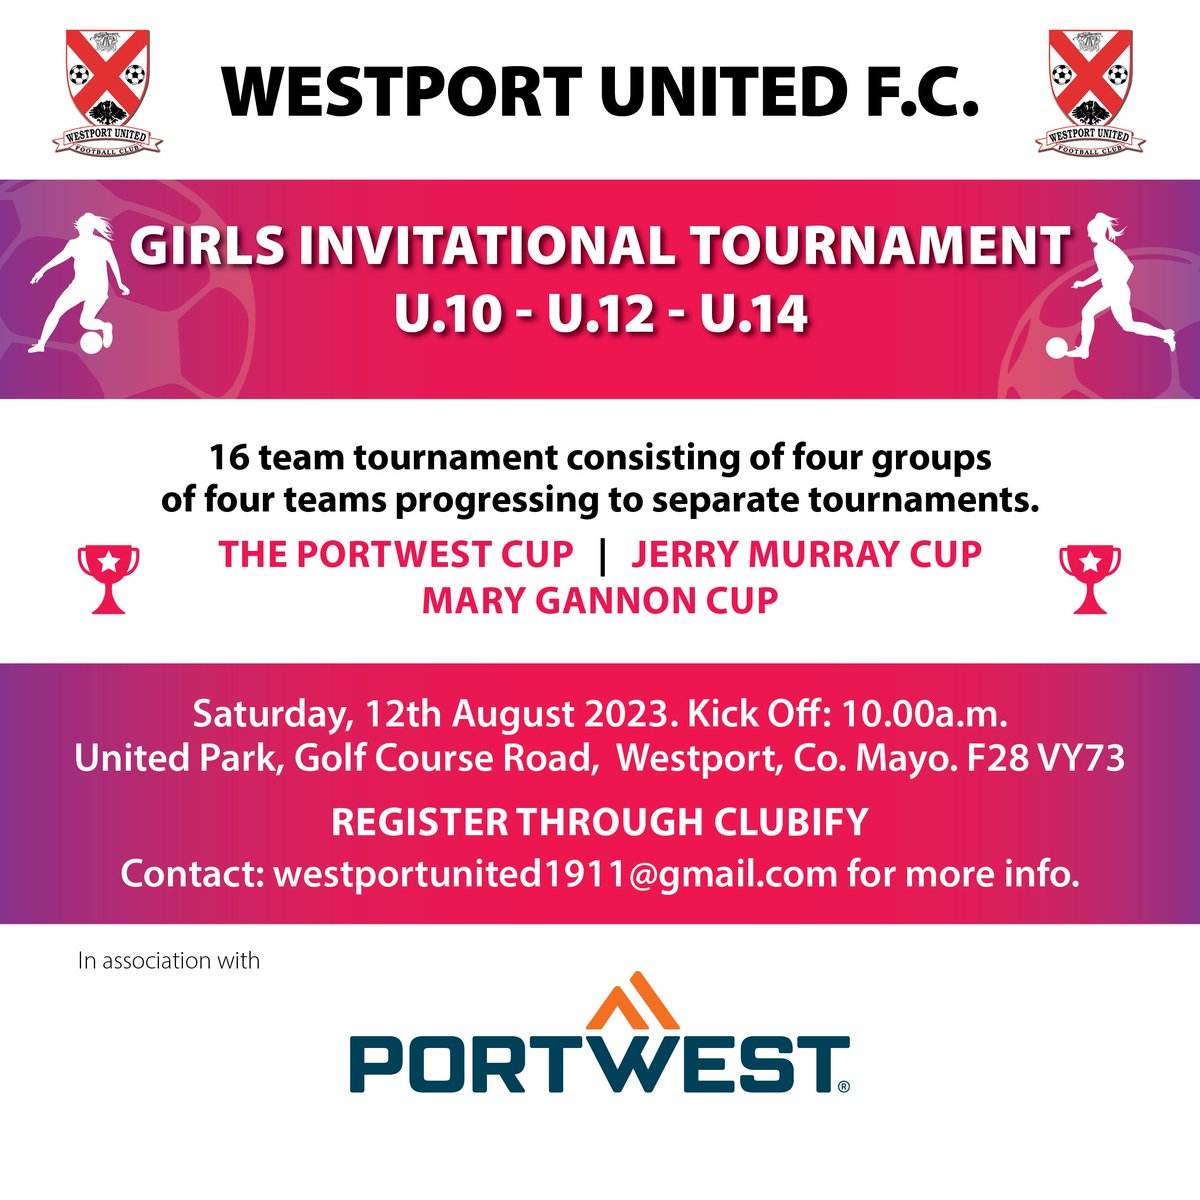 #MFL23 @WestportUtdAFC is delighted to announce that the 4th @PortwestIreland Westport United Girls Tournament will take place on Saturday 12th August at United Park, commencing at 10:00am. 🤩